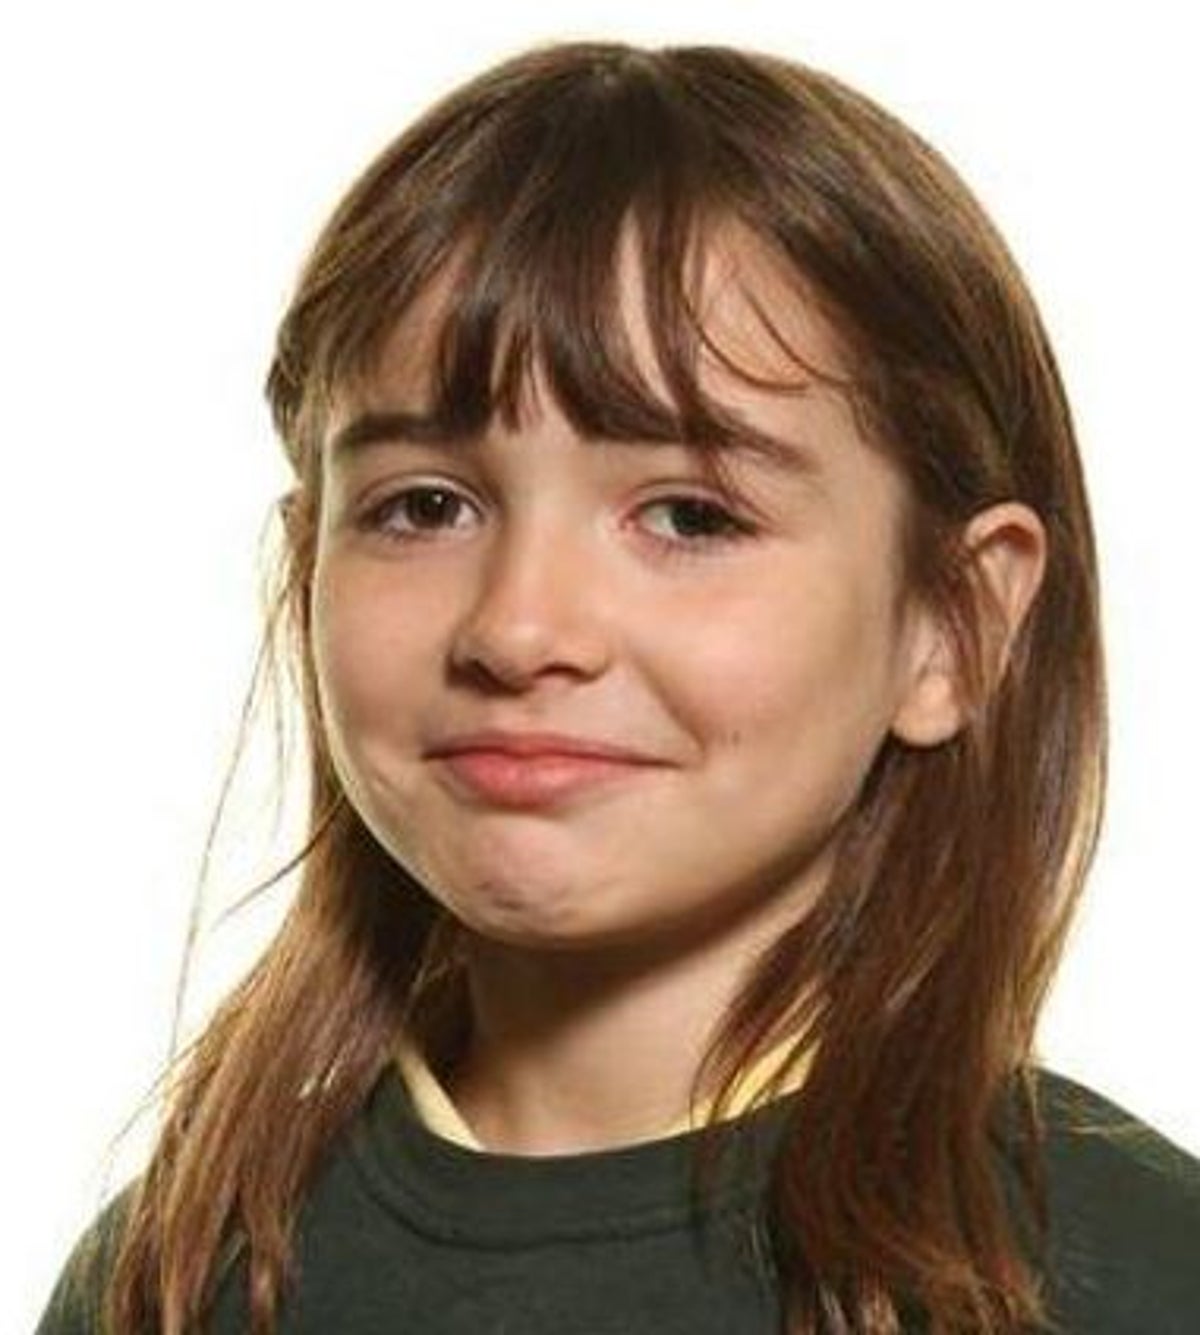 Urgent search for girl, 10, missing since Monday afternoon